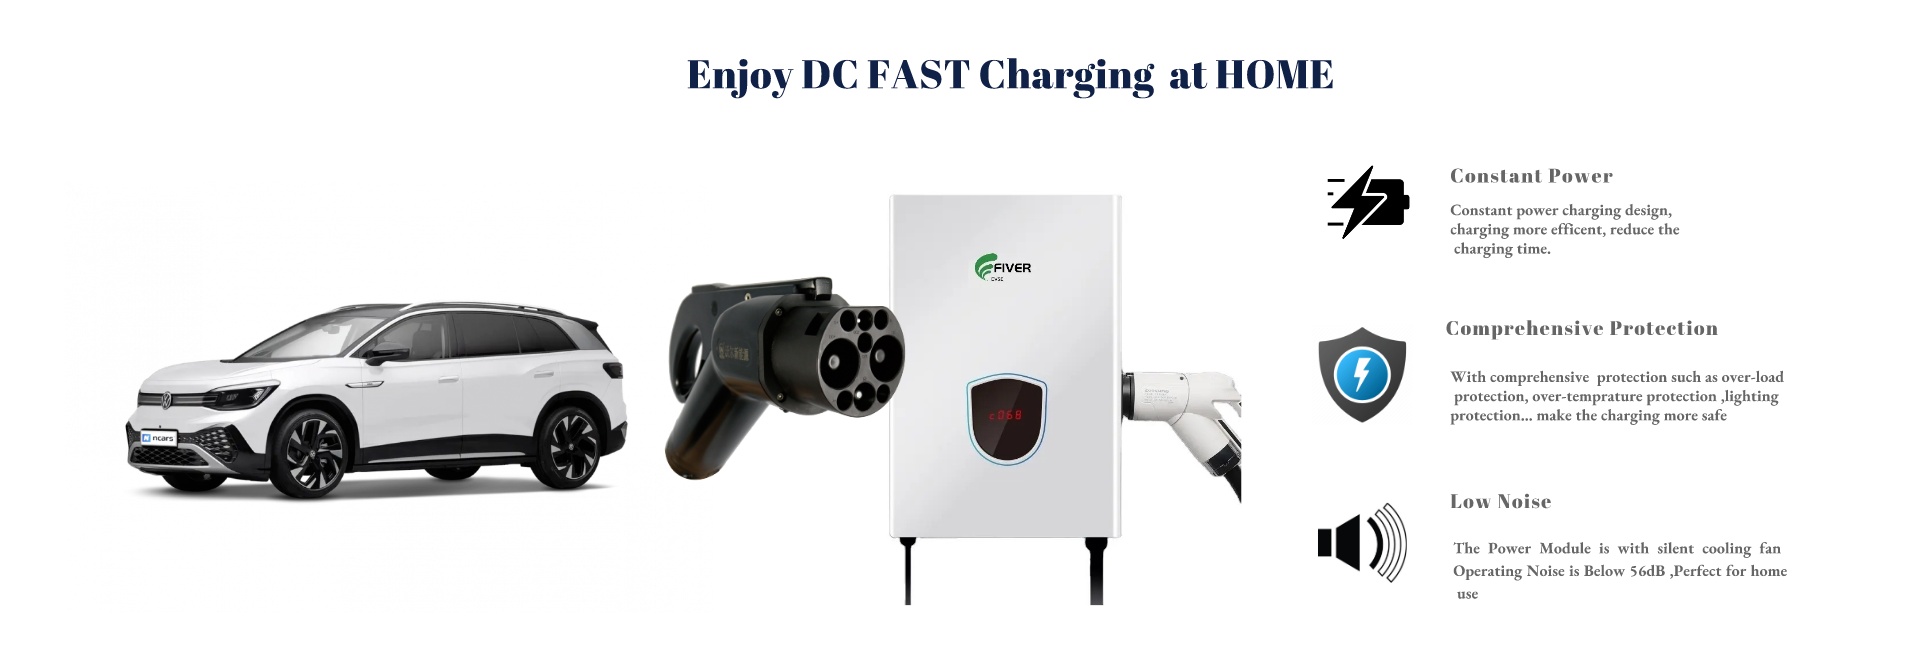 30KW DC EV Charger for VW ID6X ID6 CROZZ